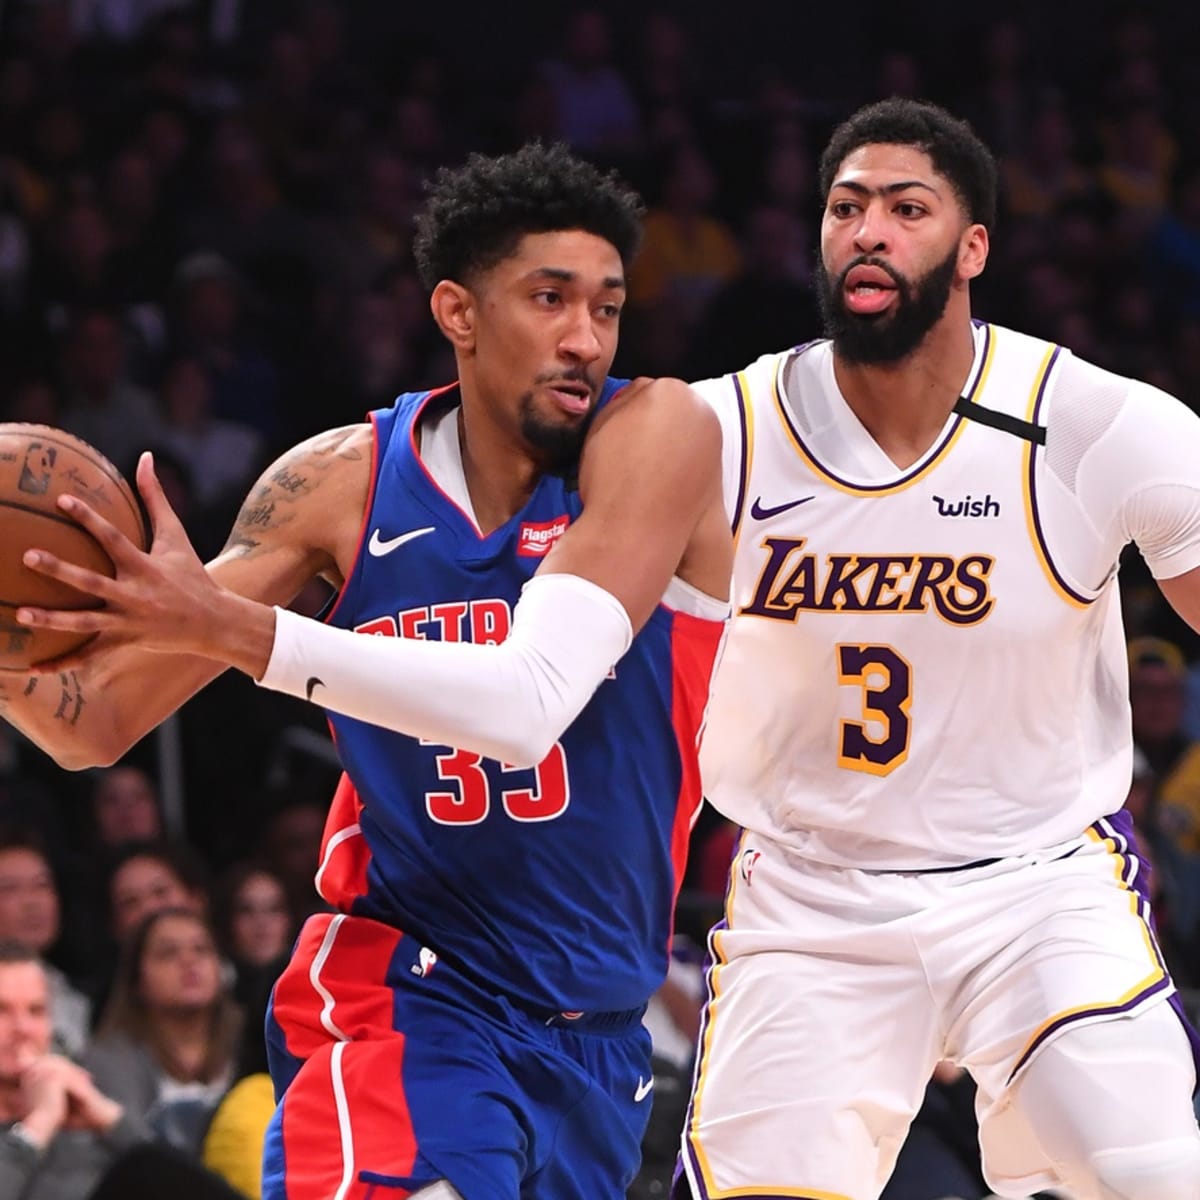 Lakers Roster & Starting Lineup: 3 Potential Options